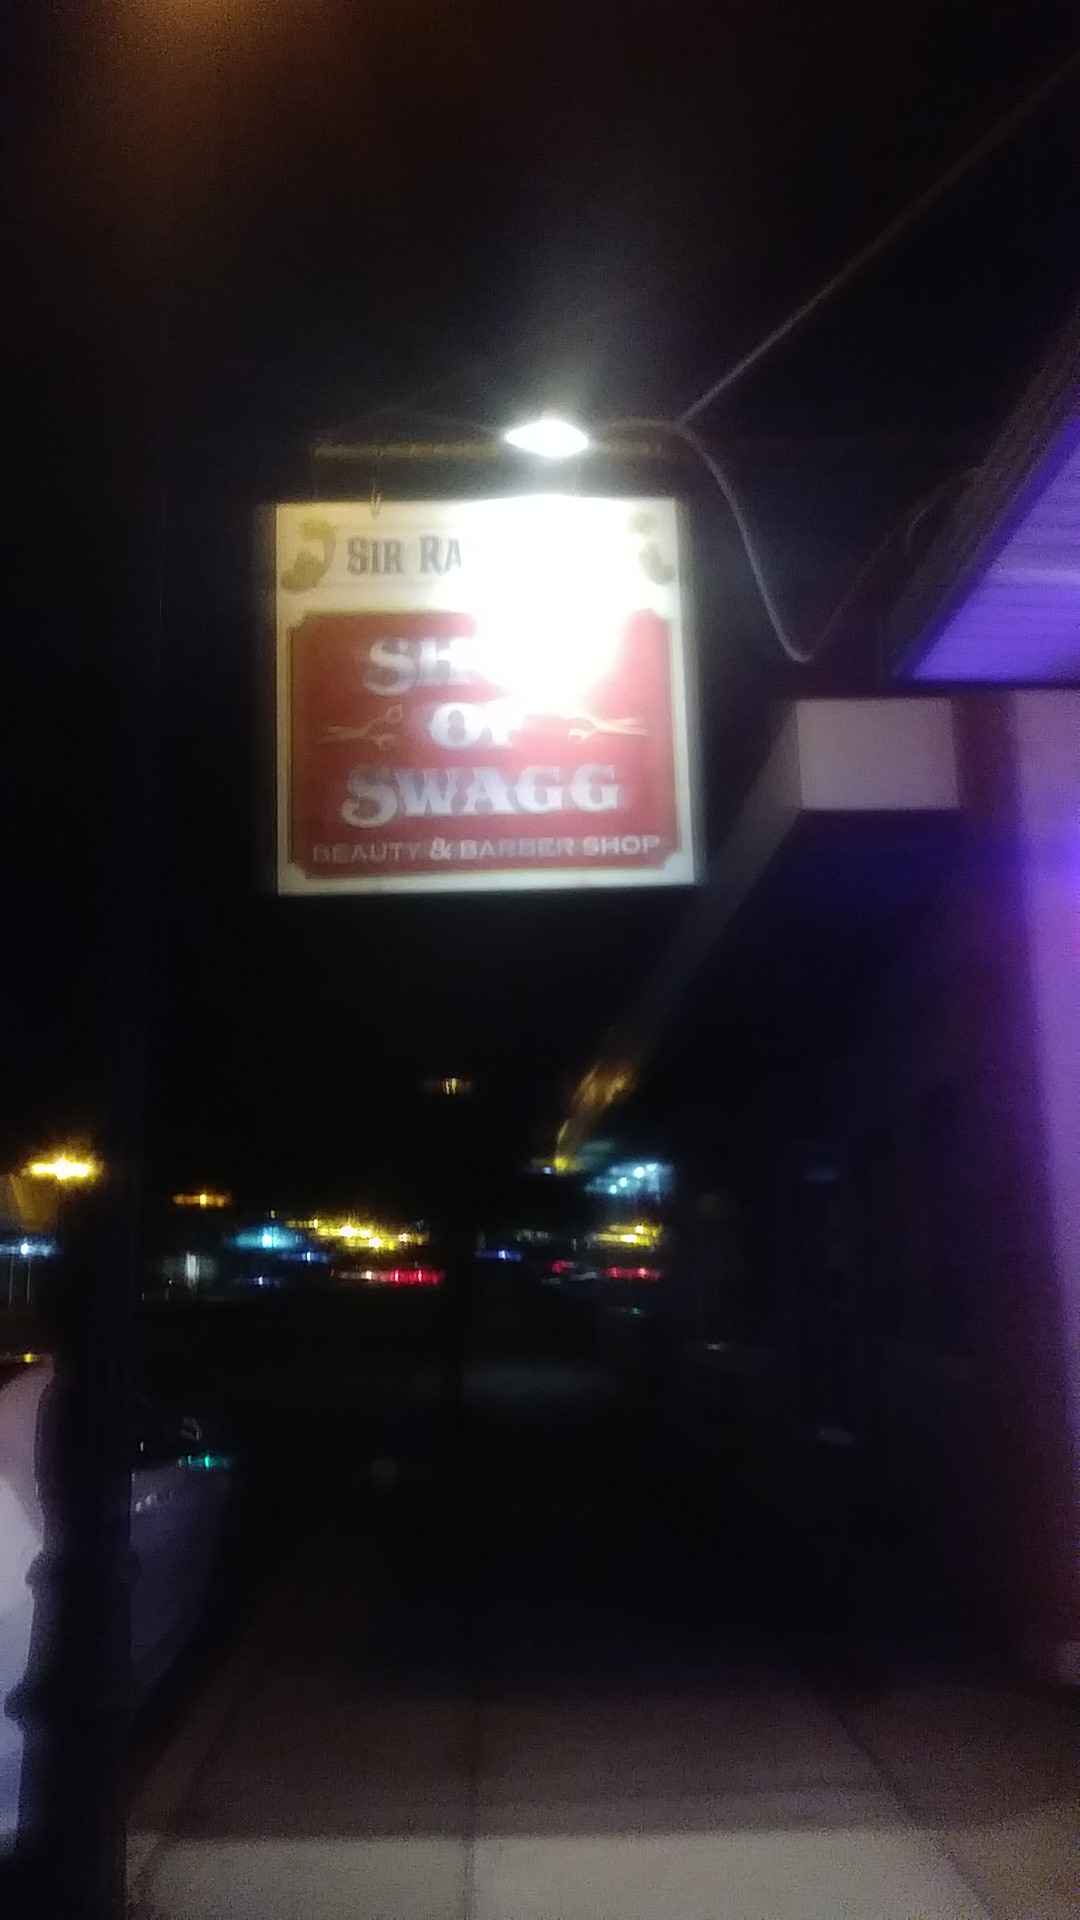 Sir Randall's Shop of Swagg